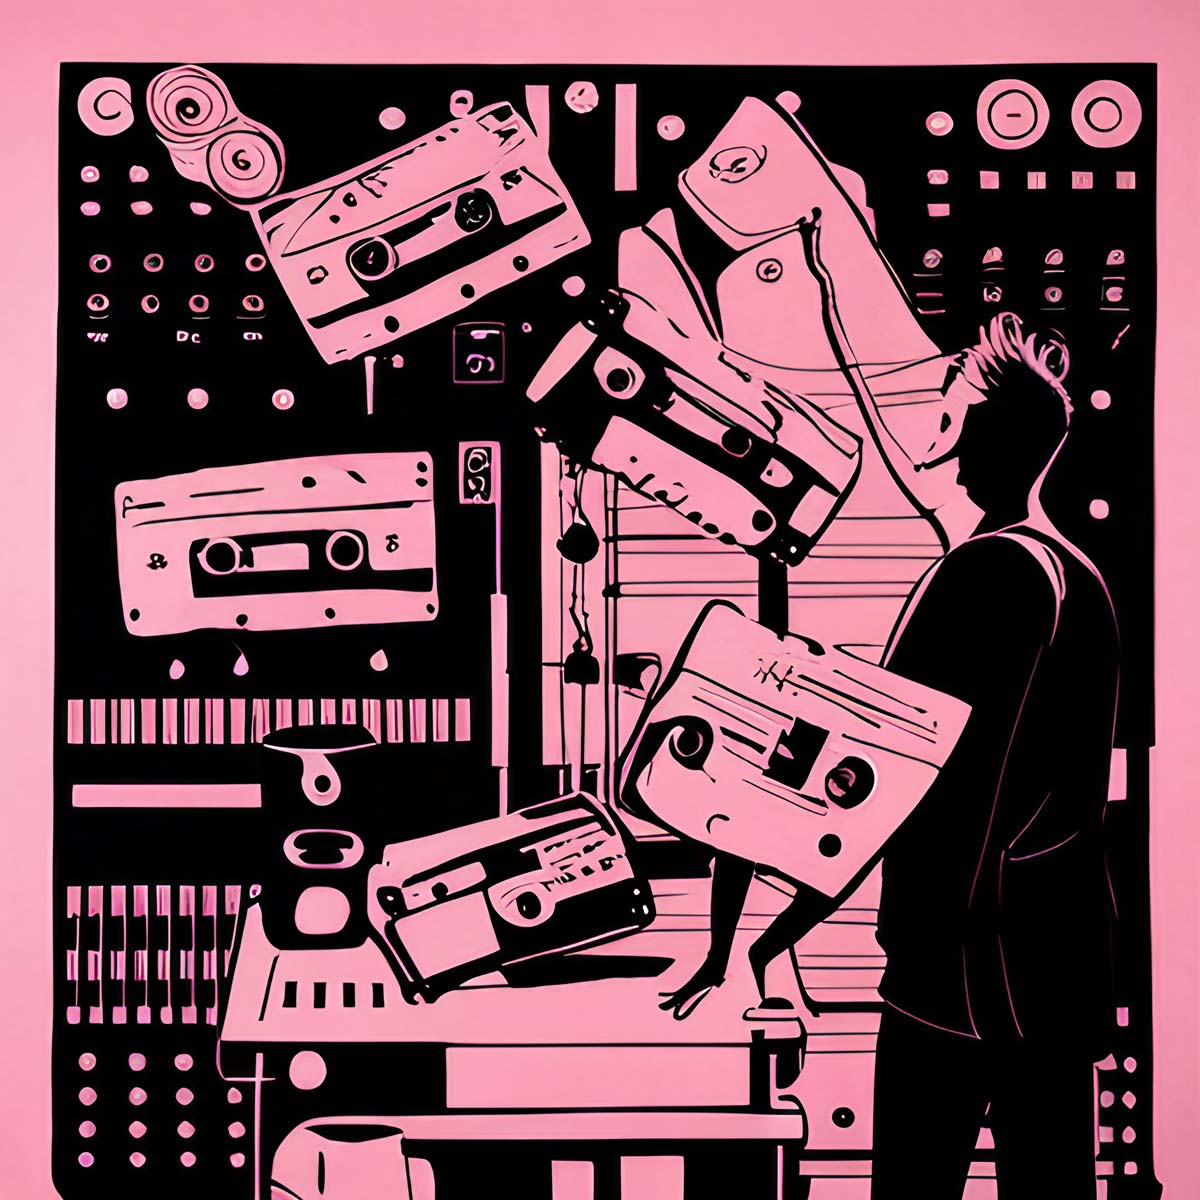 Preserving the Artistic Freedom of Cassette Culture